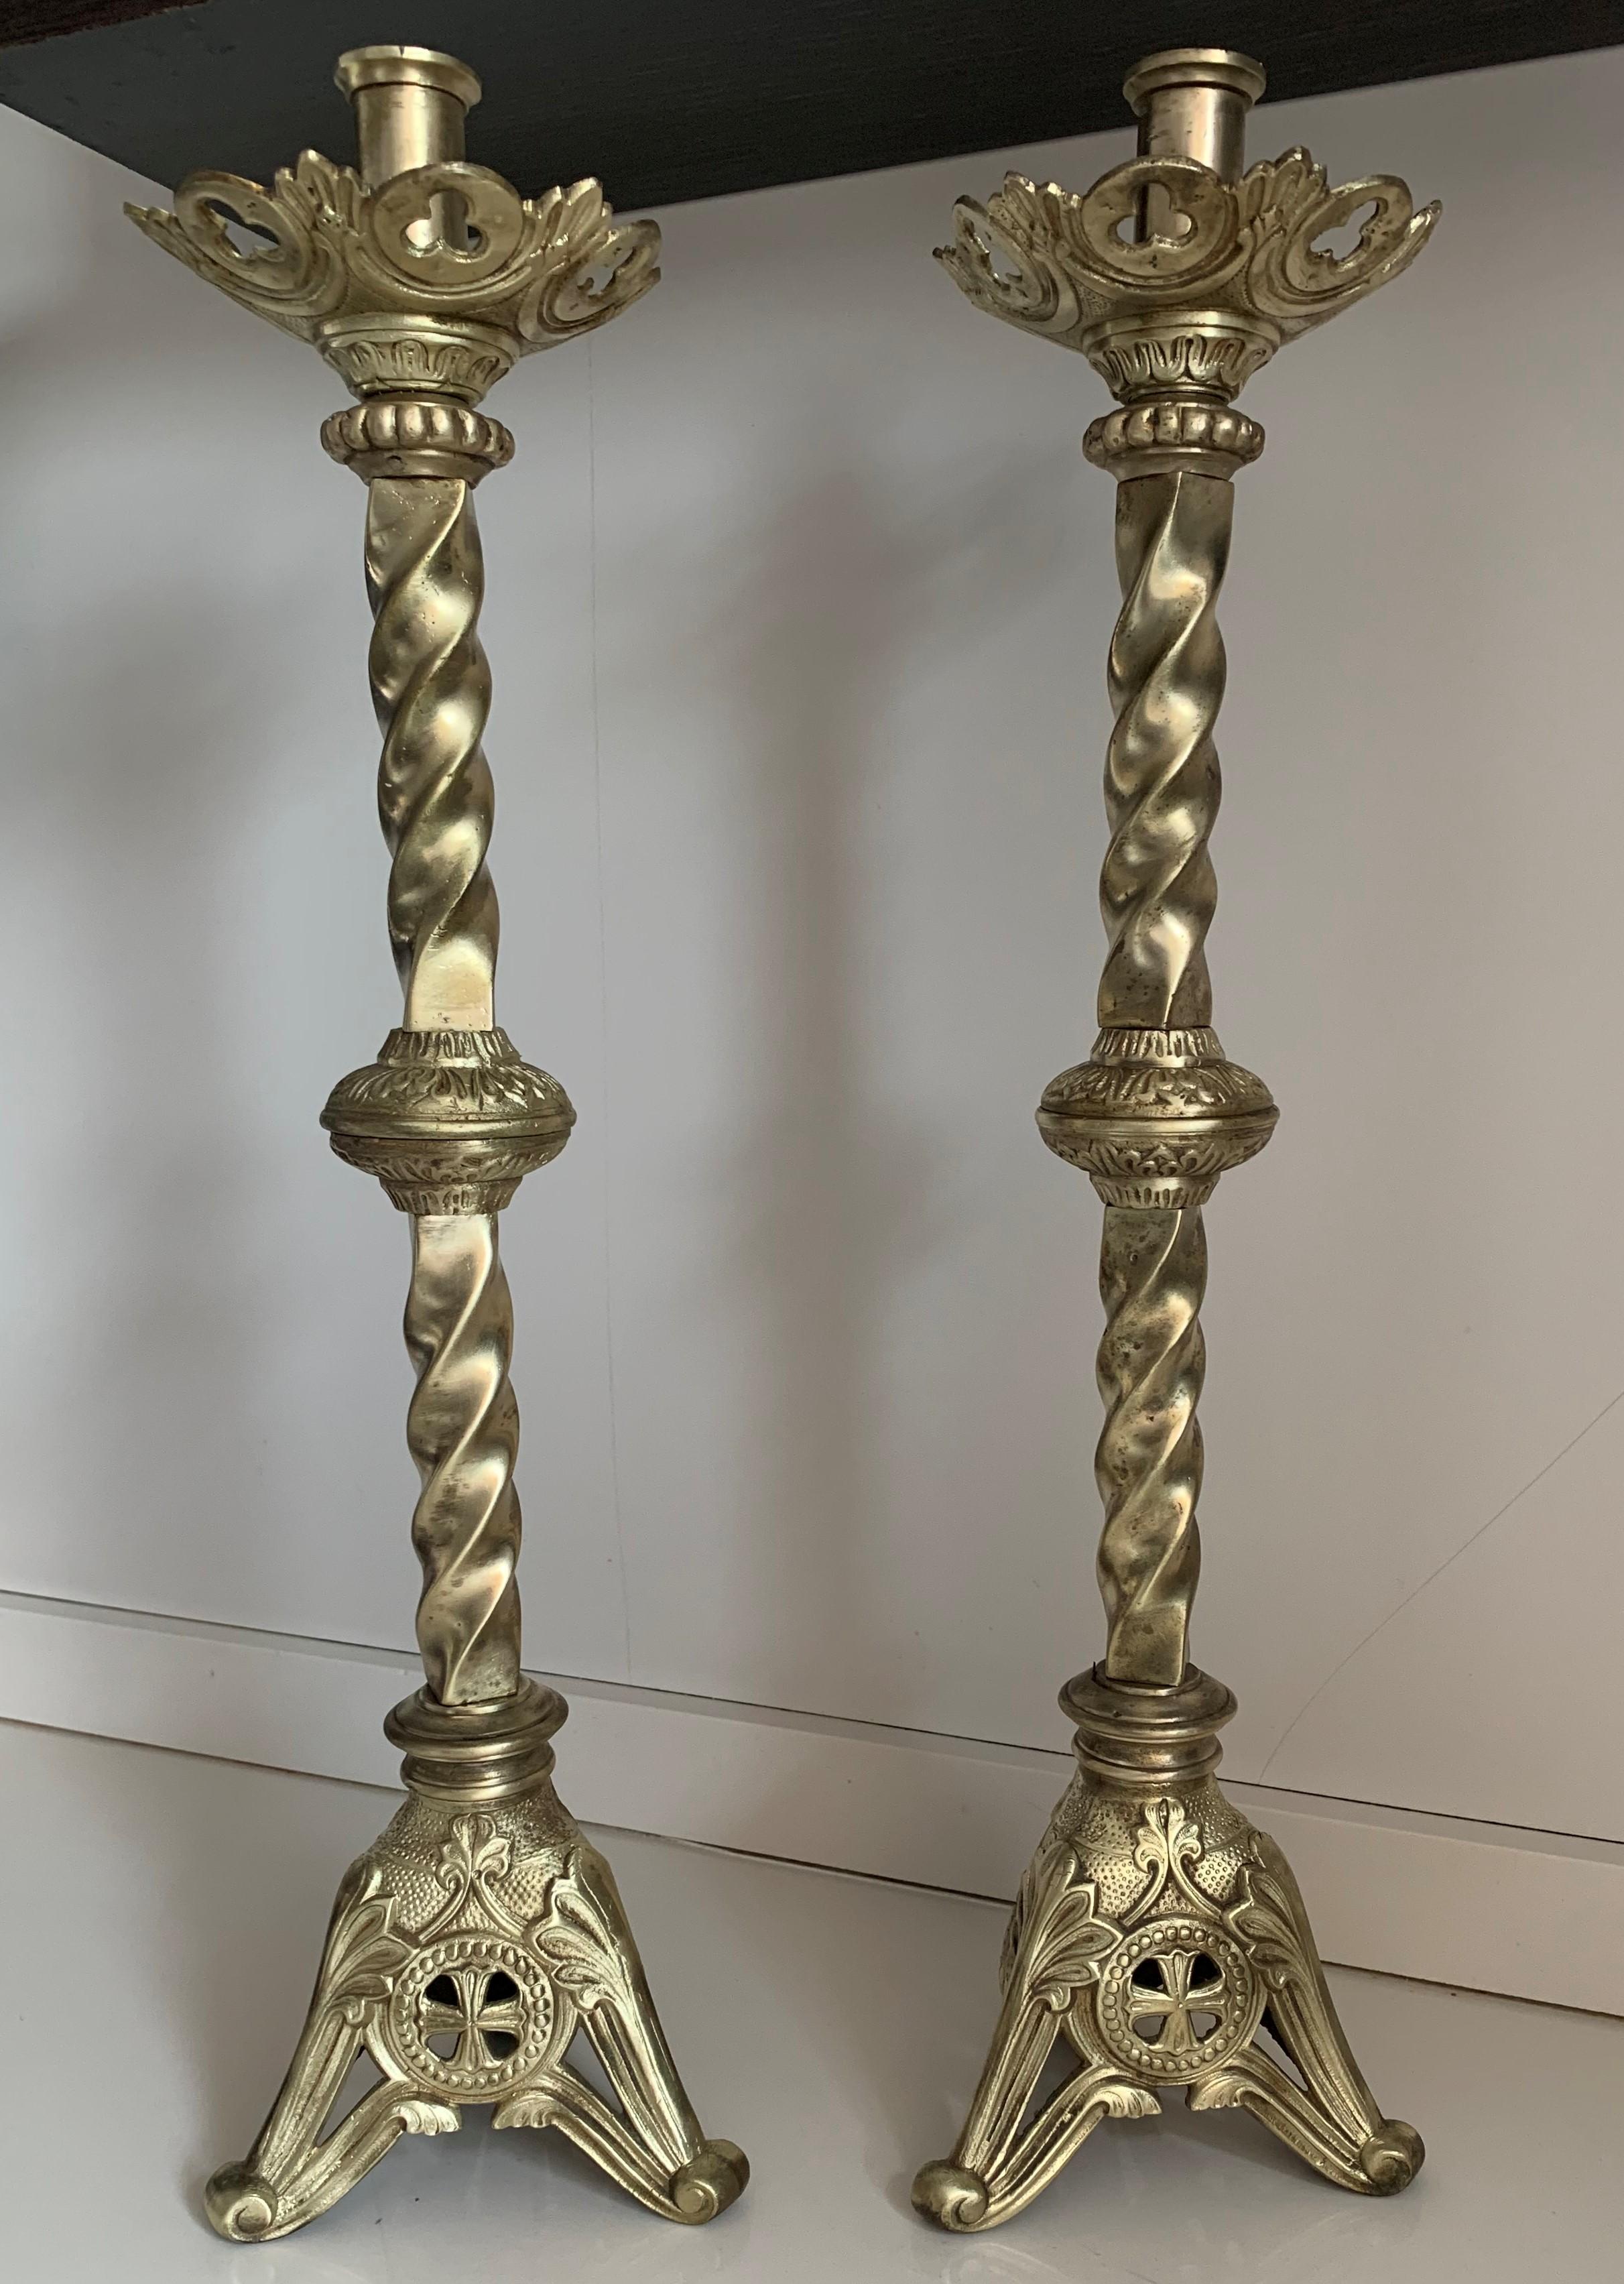 Paschal candleholder in chiseled bronze. Venice, 17th century.